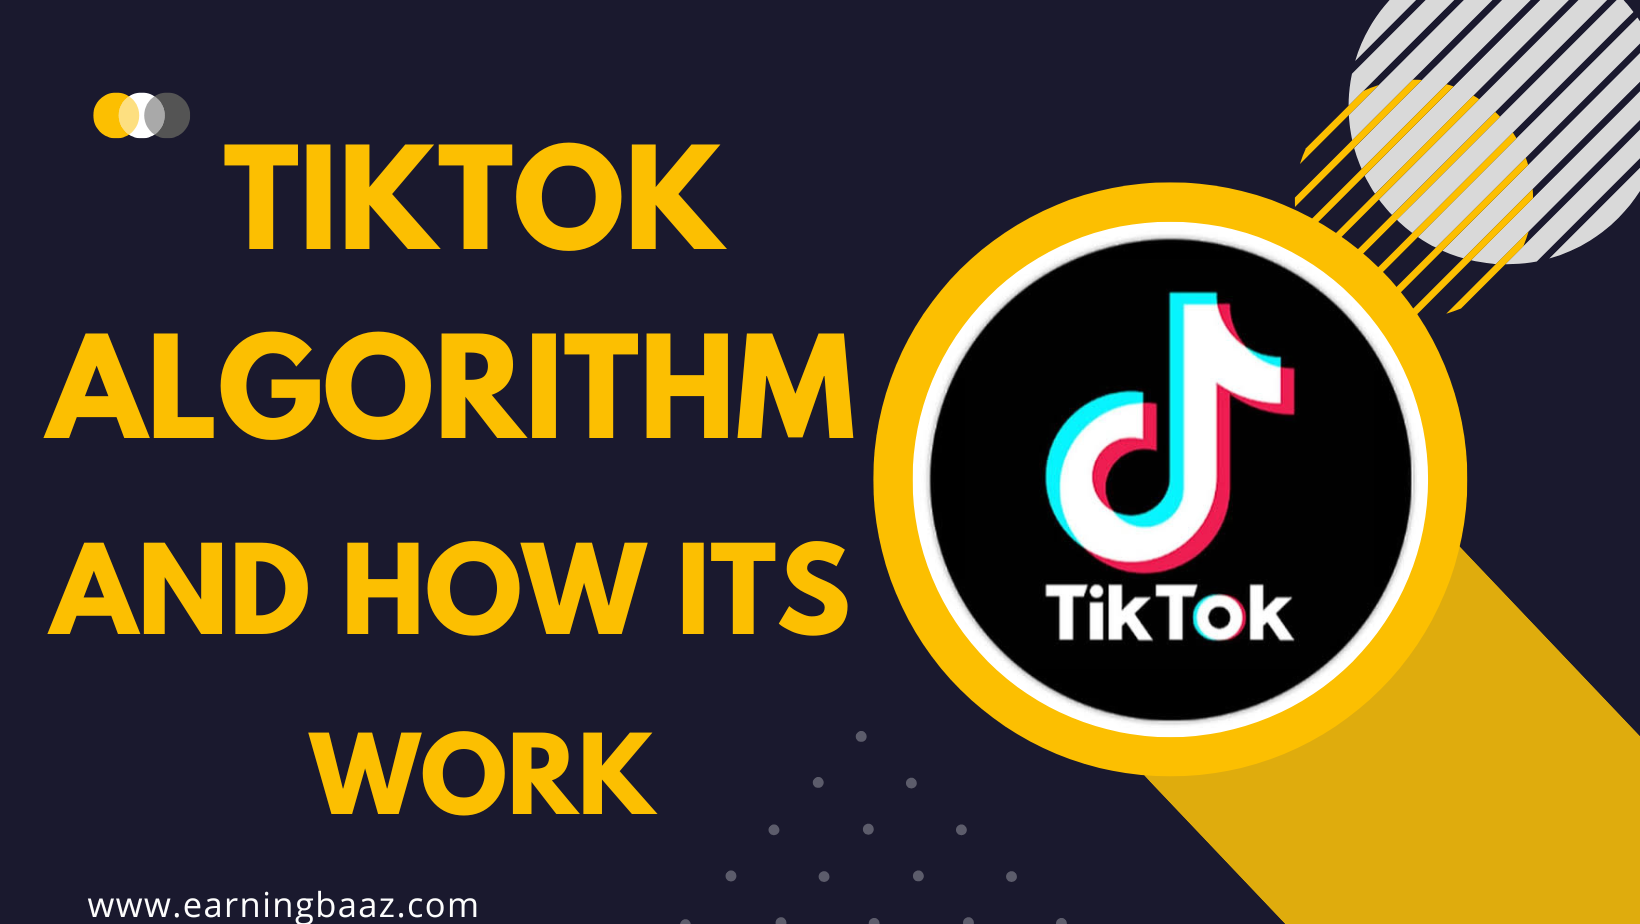 Like other apps or websites, the TikTok algorithm has its unique algorithm which has its own rules. What makes Joas unique and interesting from other apps? TikTok is a short video-making app. It is a public attention-grabbing platform. Different people have different opinions on TikTok's algorithm.